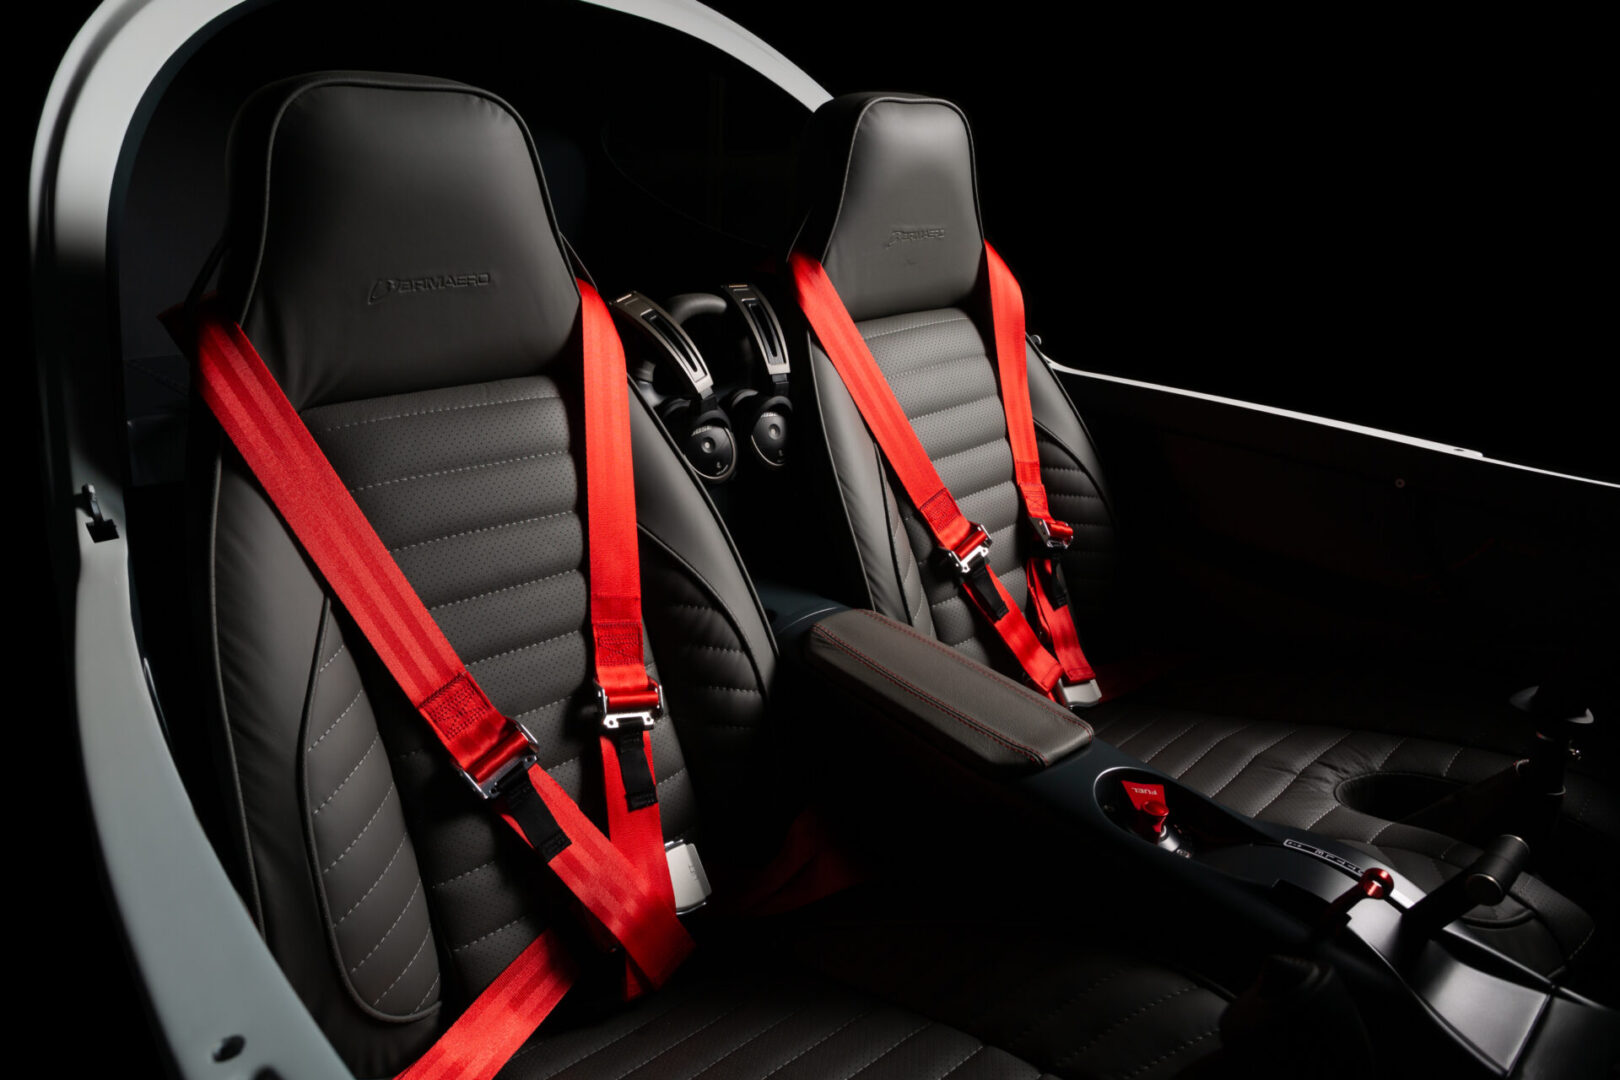 A car seat with two red seats and one black seat.